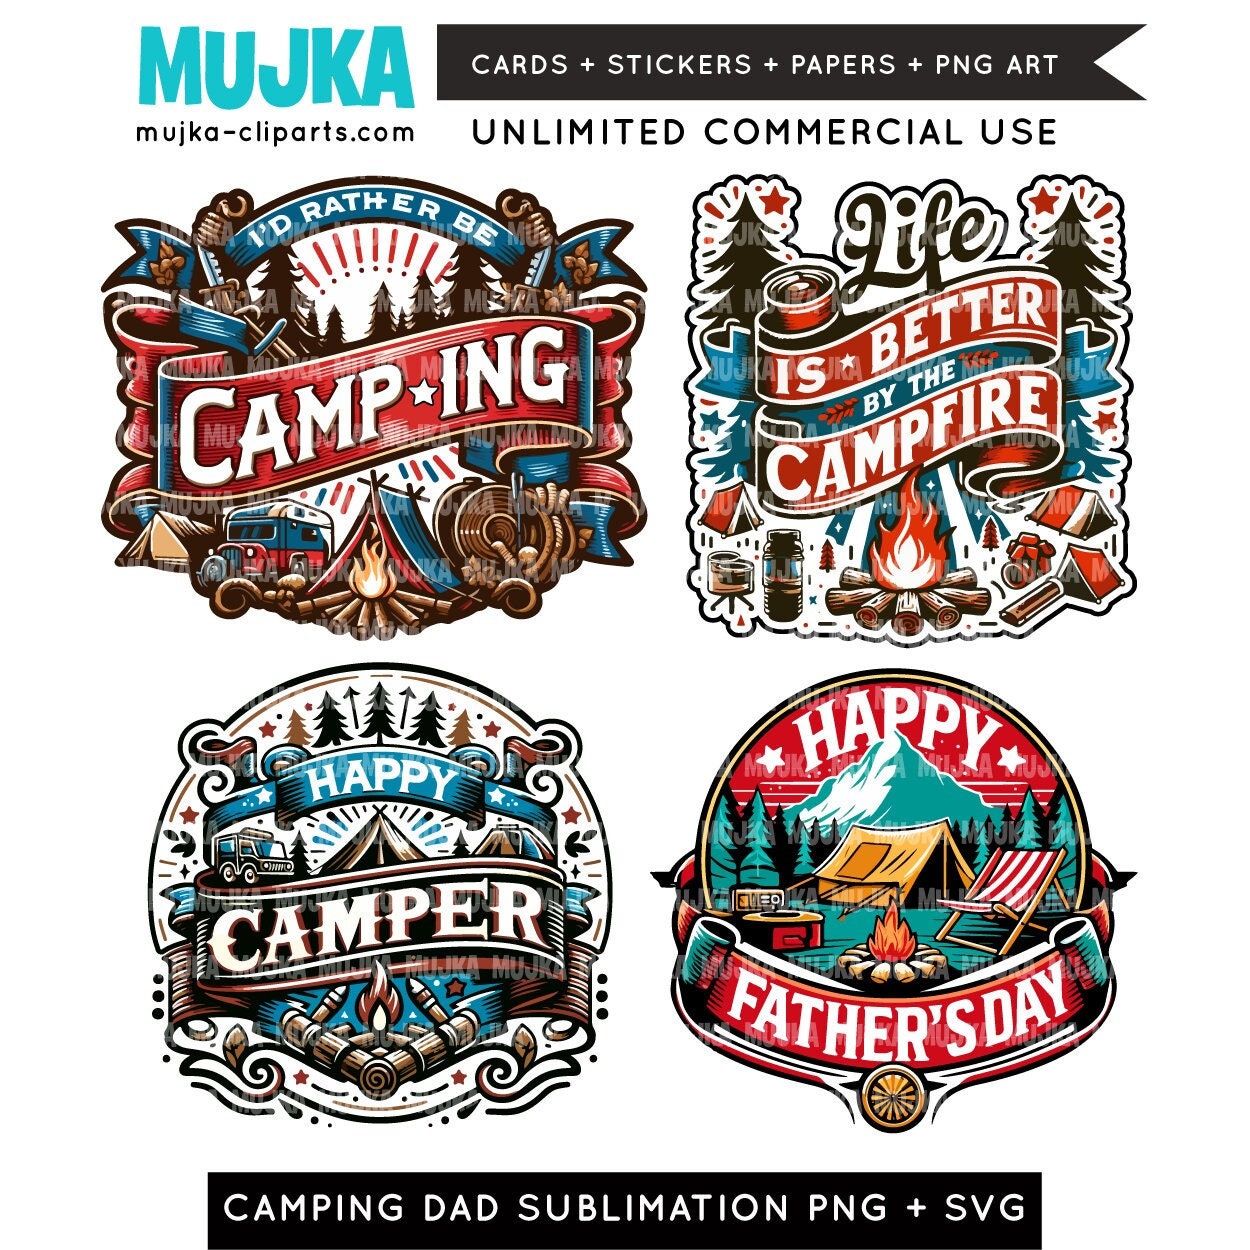 I'd Rather be Camping Png SVG, Life is better by the Campfire png, Sublimation Design, Camping Dad SVG, Father's day Gift, Camper Tshirt SVG